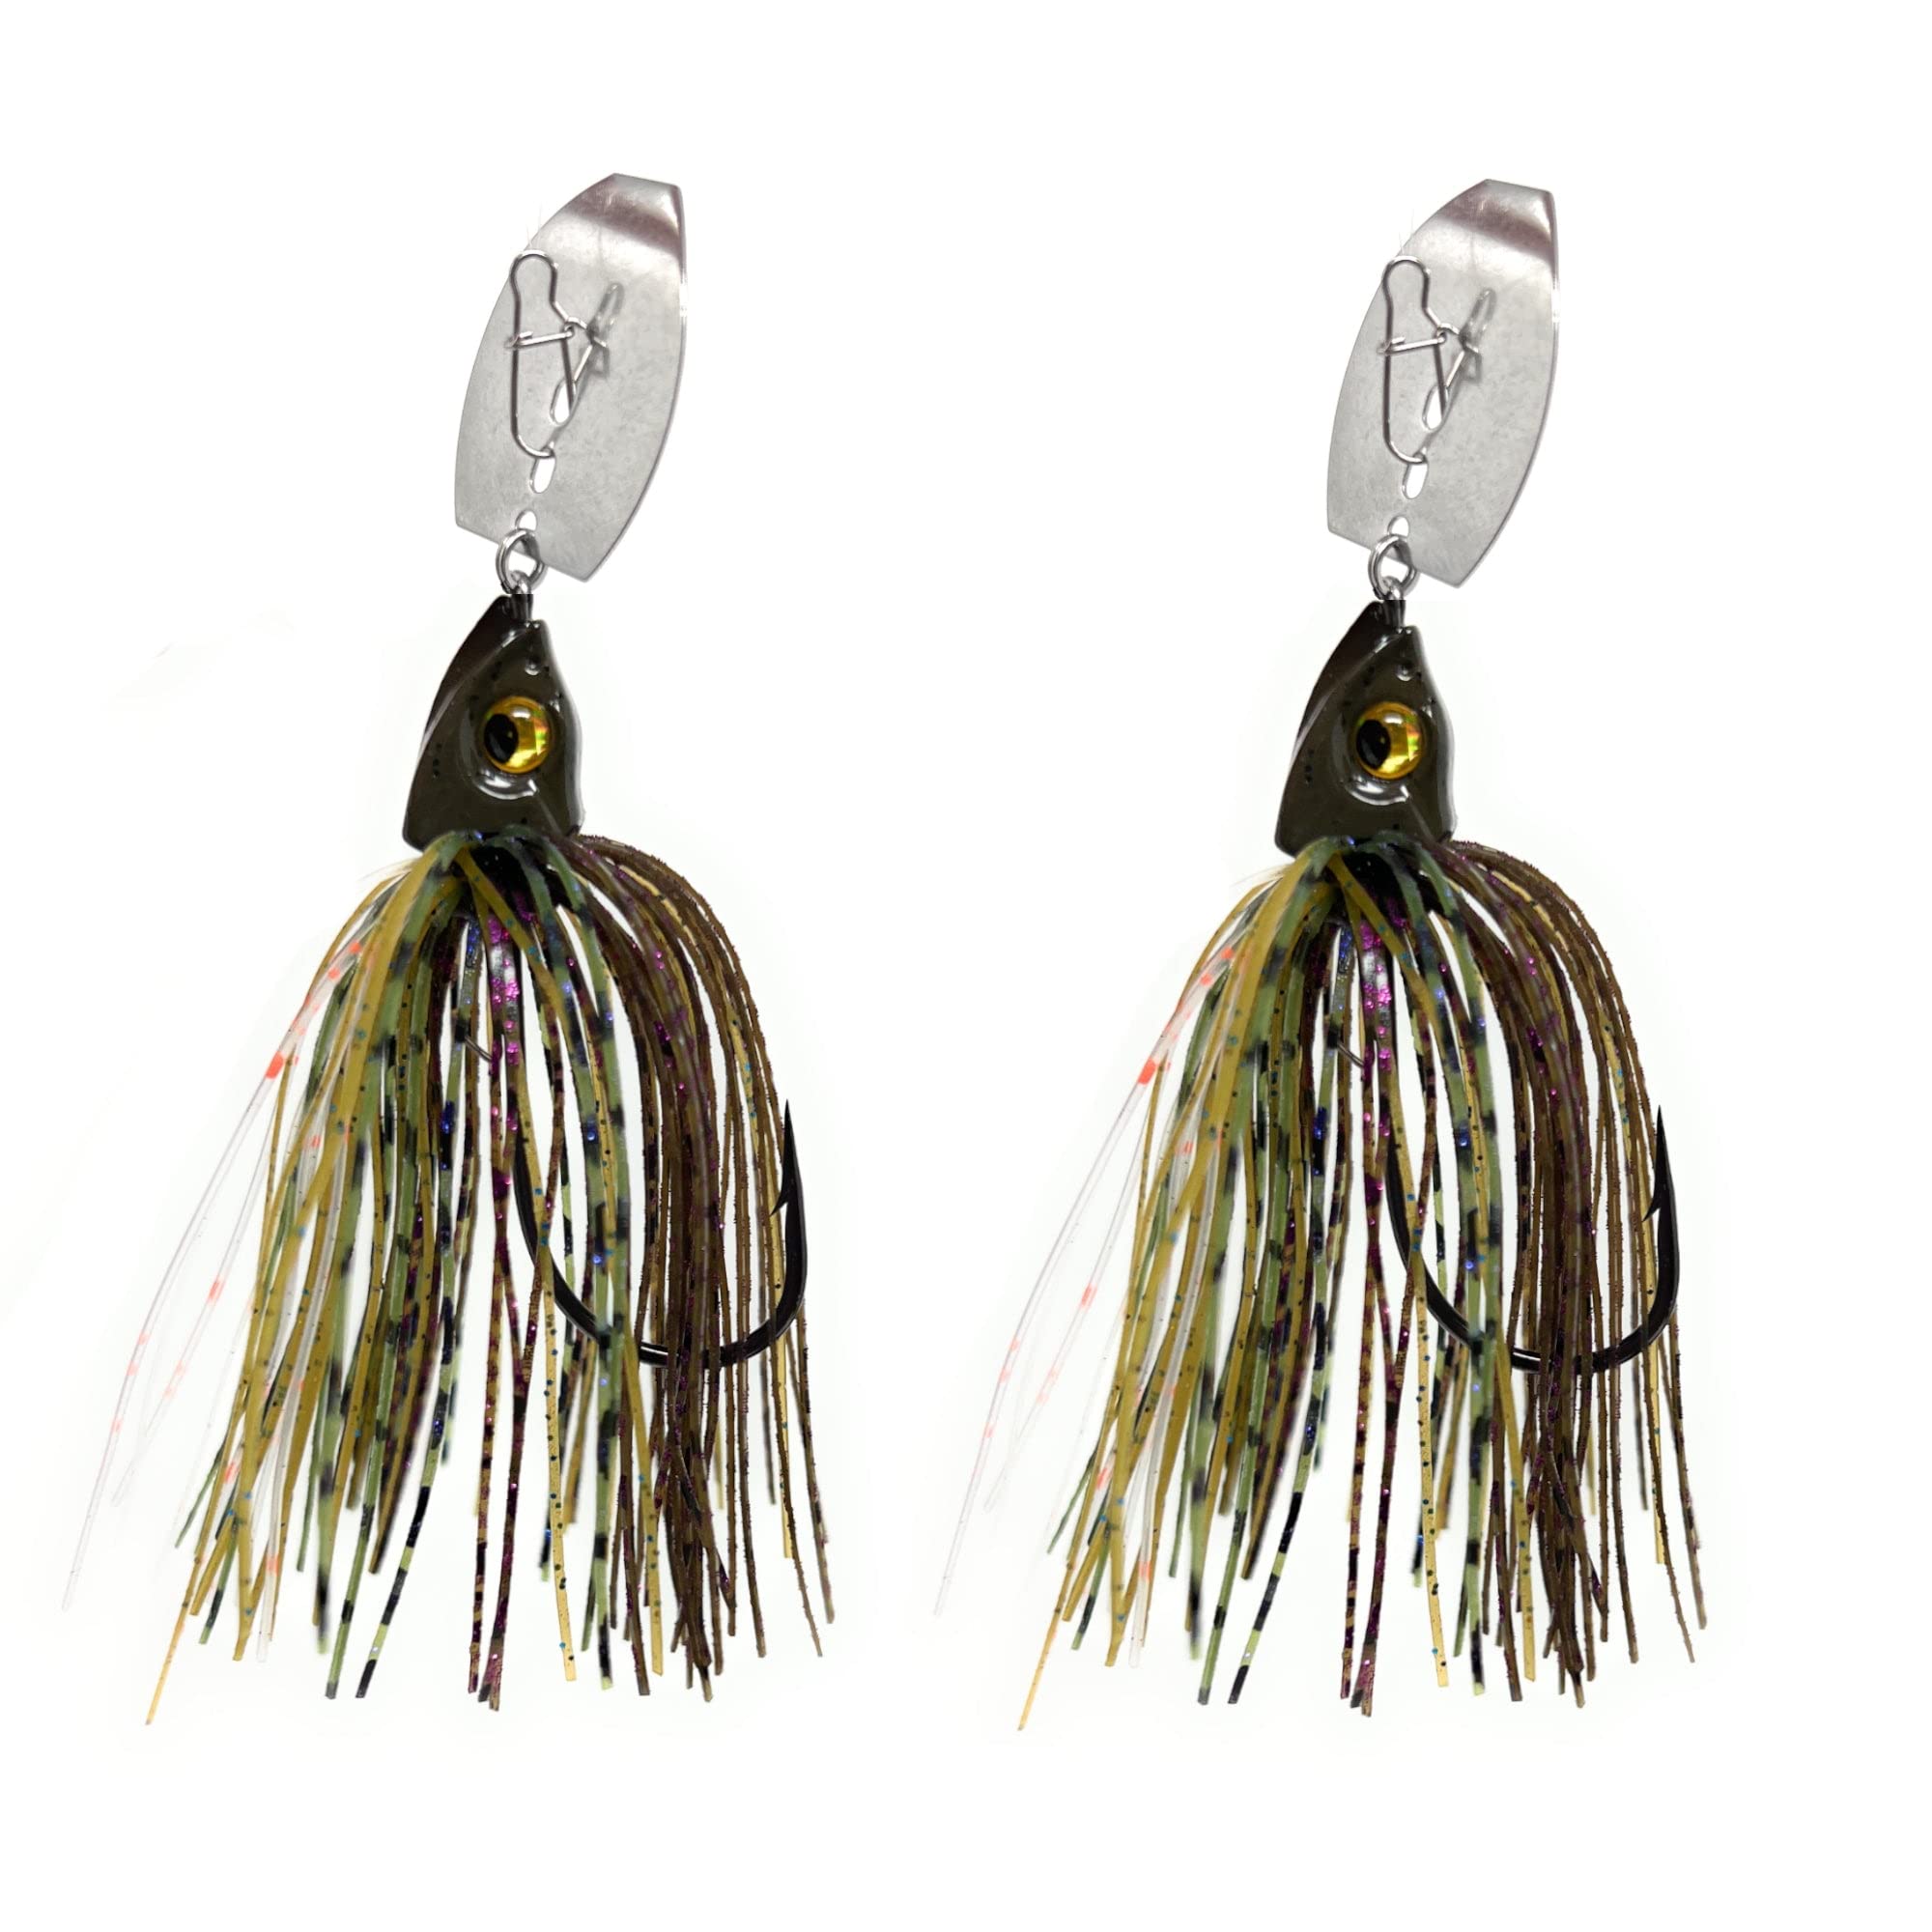 Reaction Tackle Tungsten Bladed Swim Jig Heads for Fishing - 2 Pack of Fishing  Jigs for Large